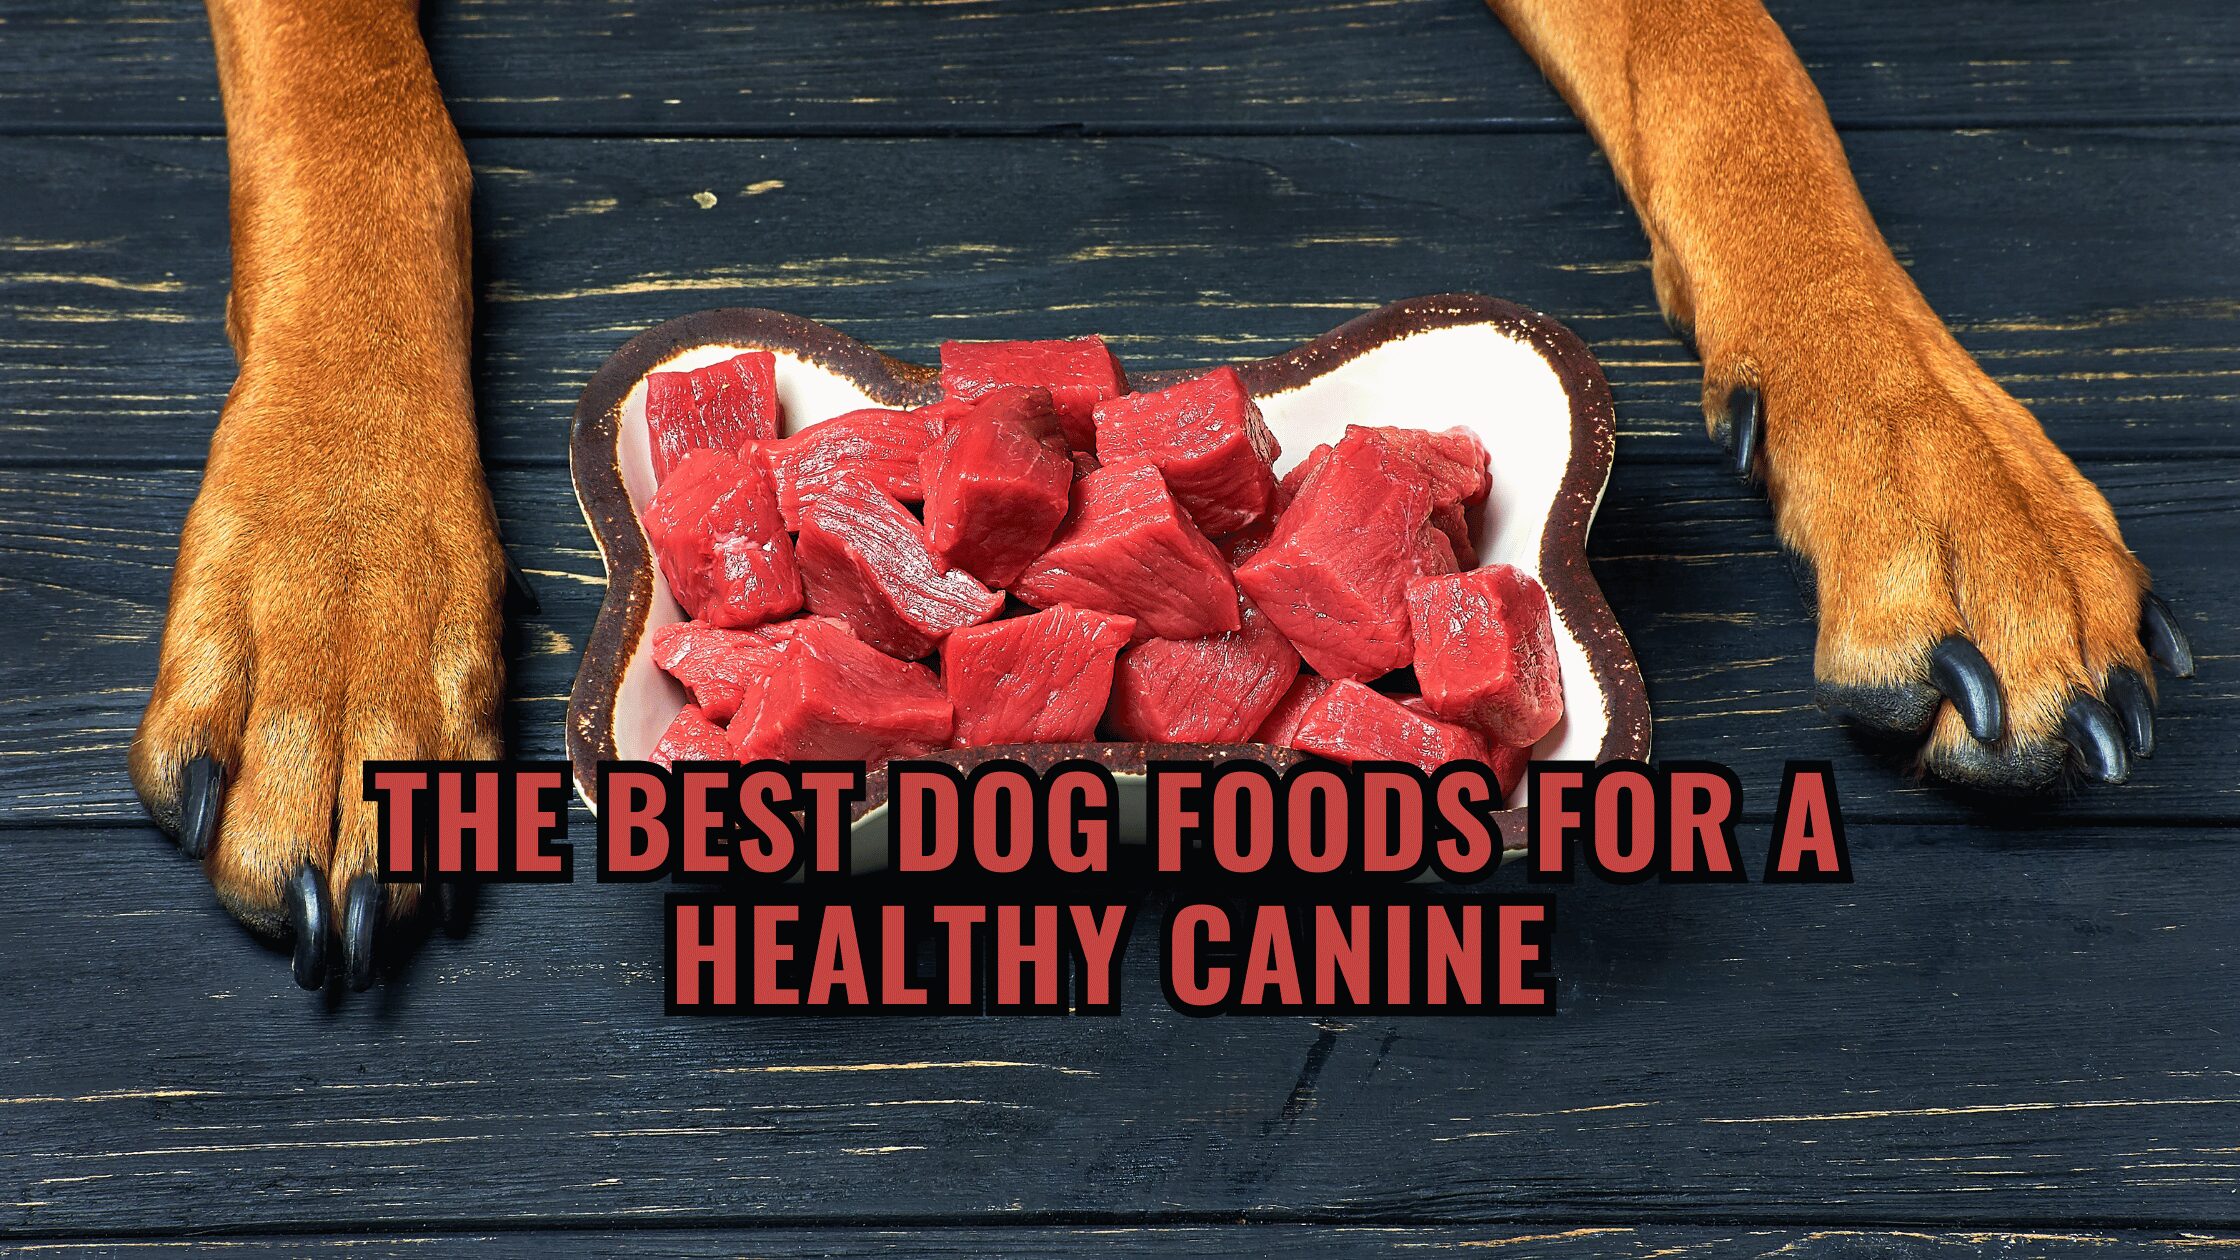 The Best Dog Foods for a Healthy Canine